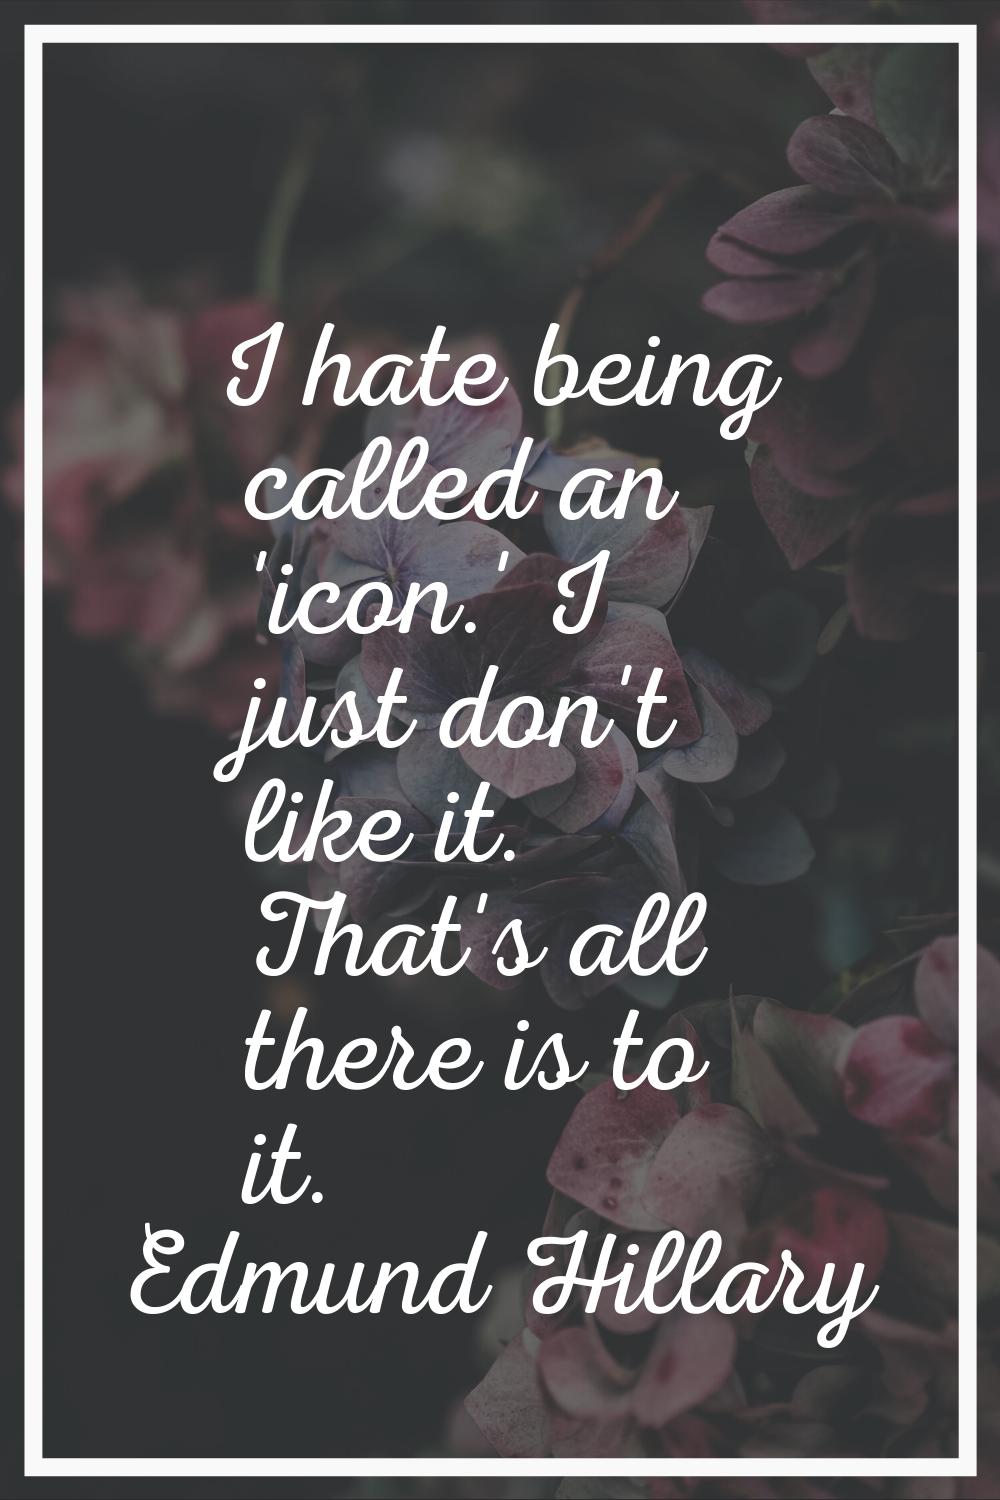 I hate being called an 'icon.' I just don't like it. That's all there is to it.